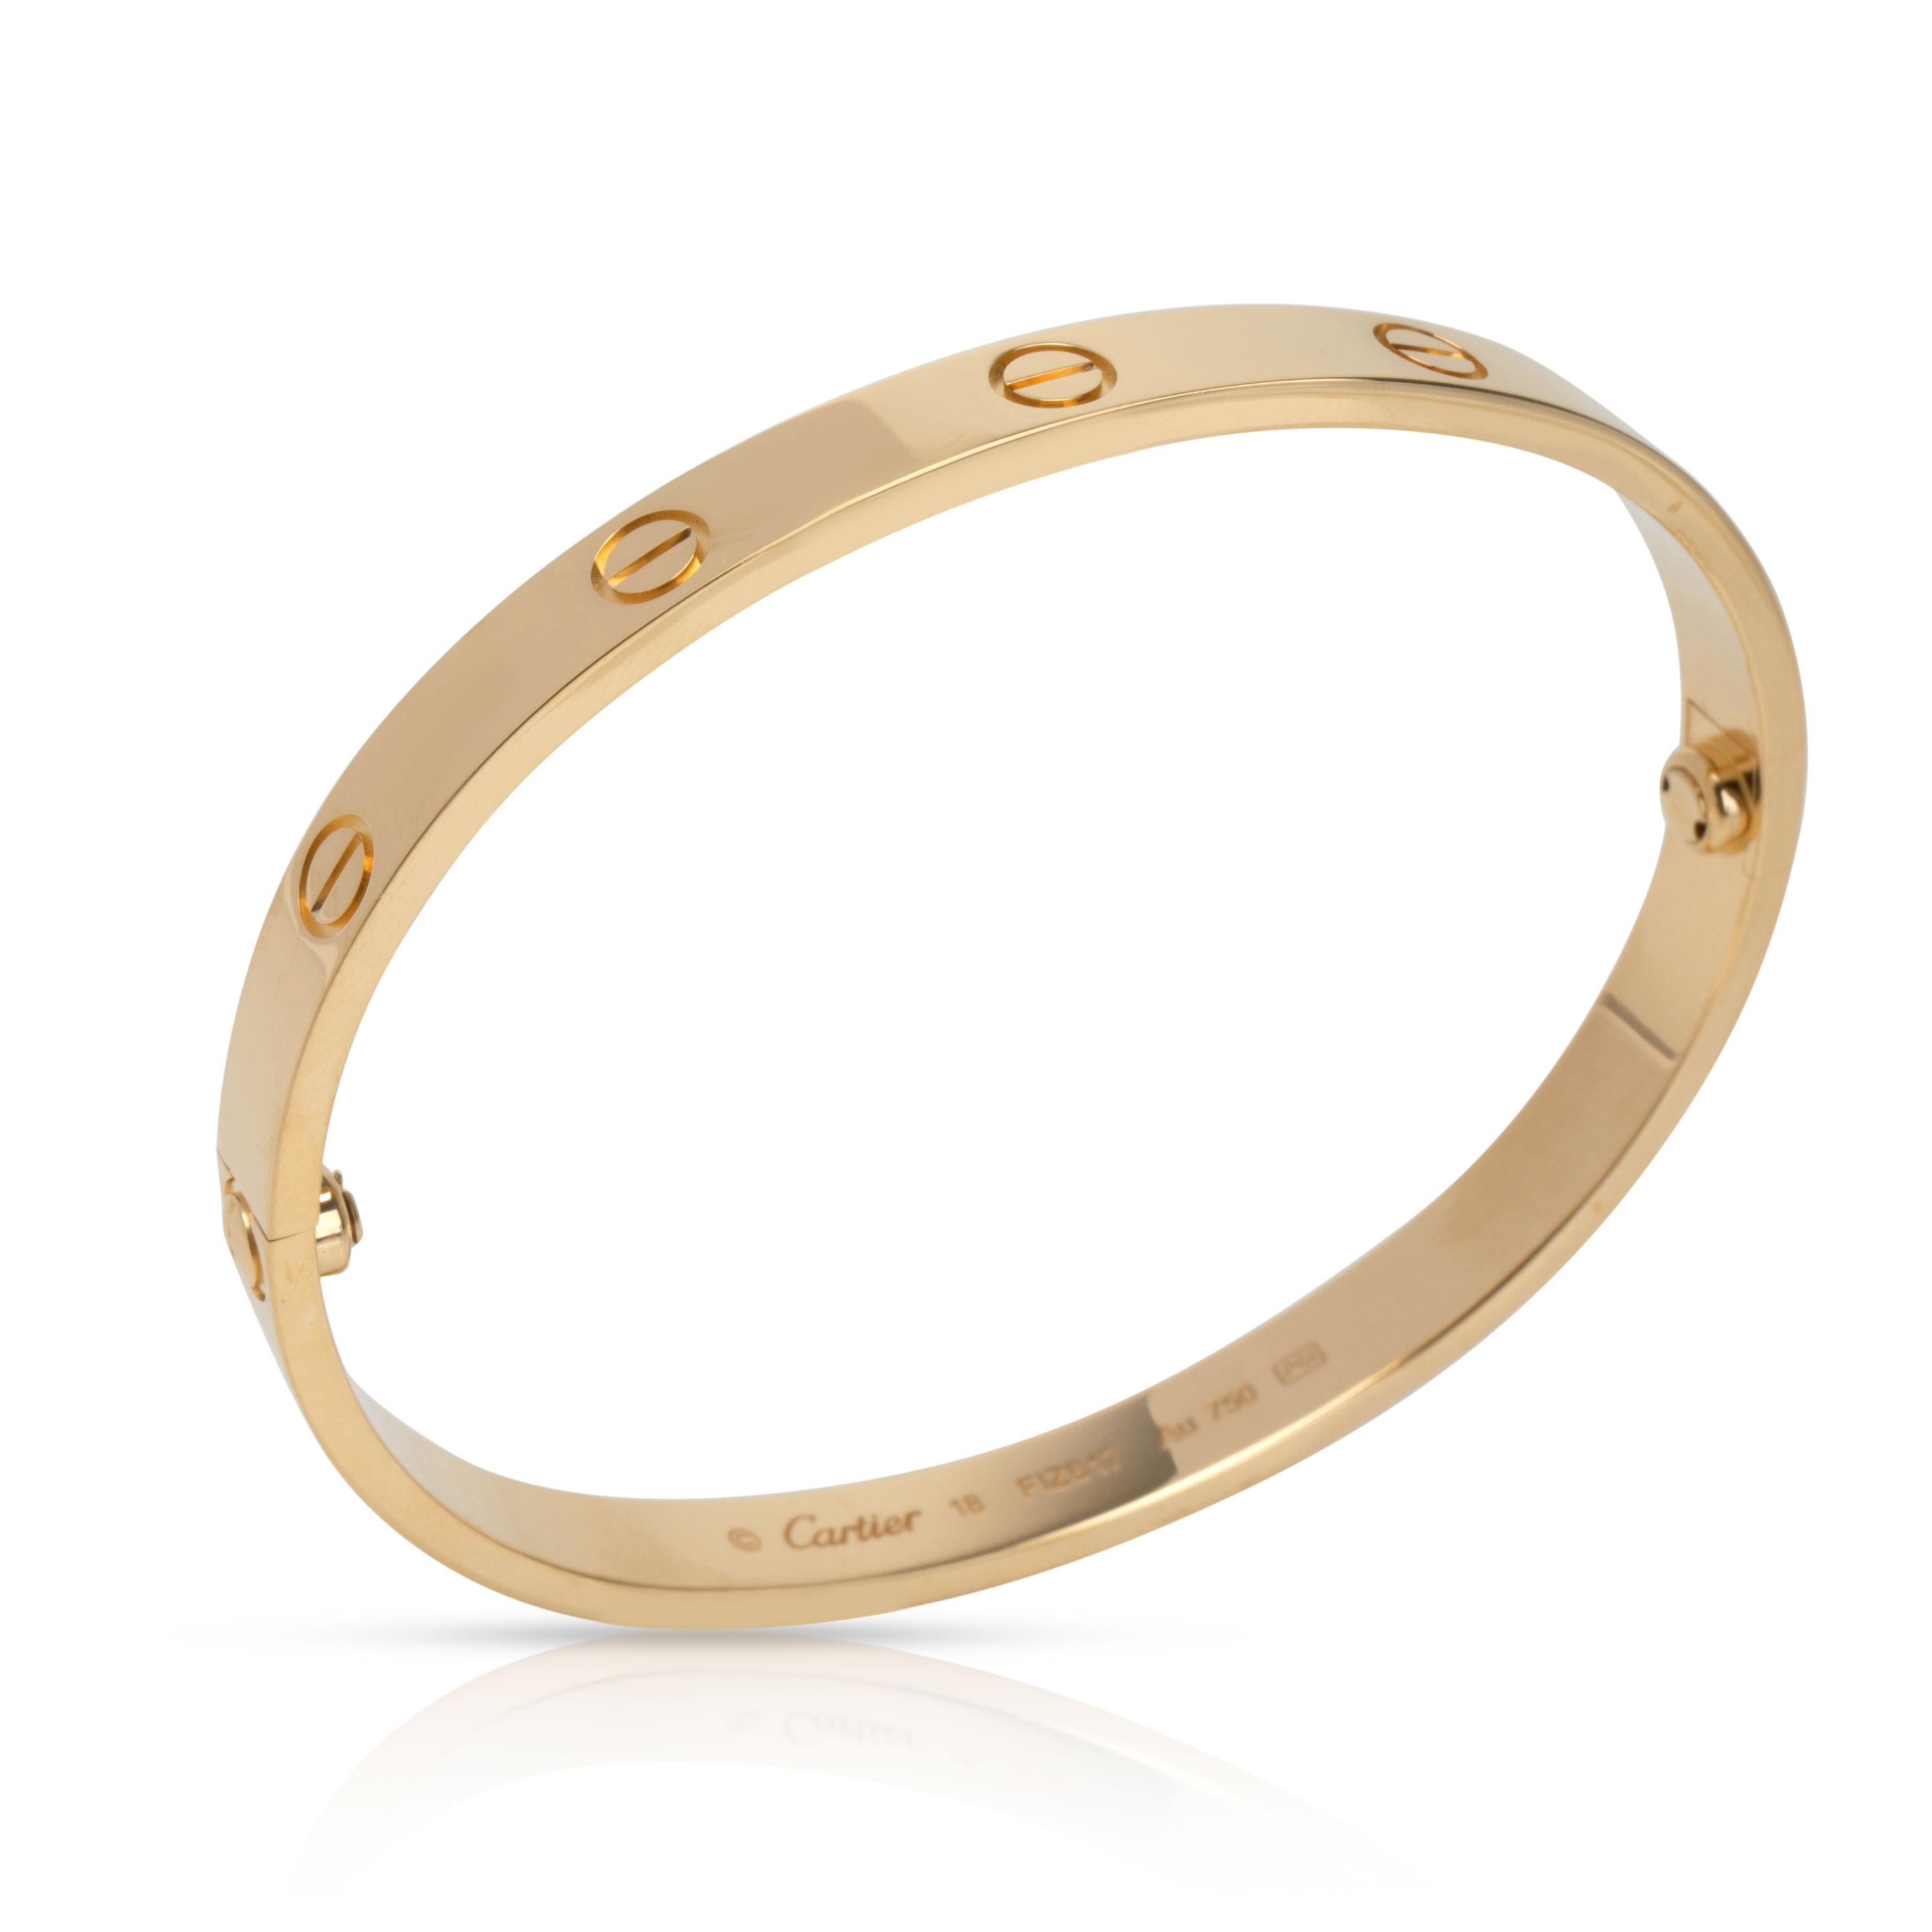 Cartier Love Bracelet in 18K Yellow Gold Size 18

PRIMARY DETAILS

SKU: 105477

Condition Description: Retails for 6,300 USD. In excellent condition and recently polished. Cartier size 18. Comes with the original box and papers.

Brand: